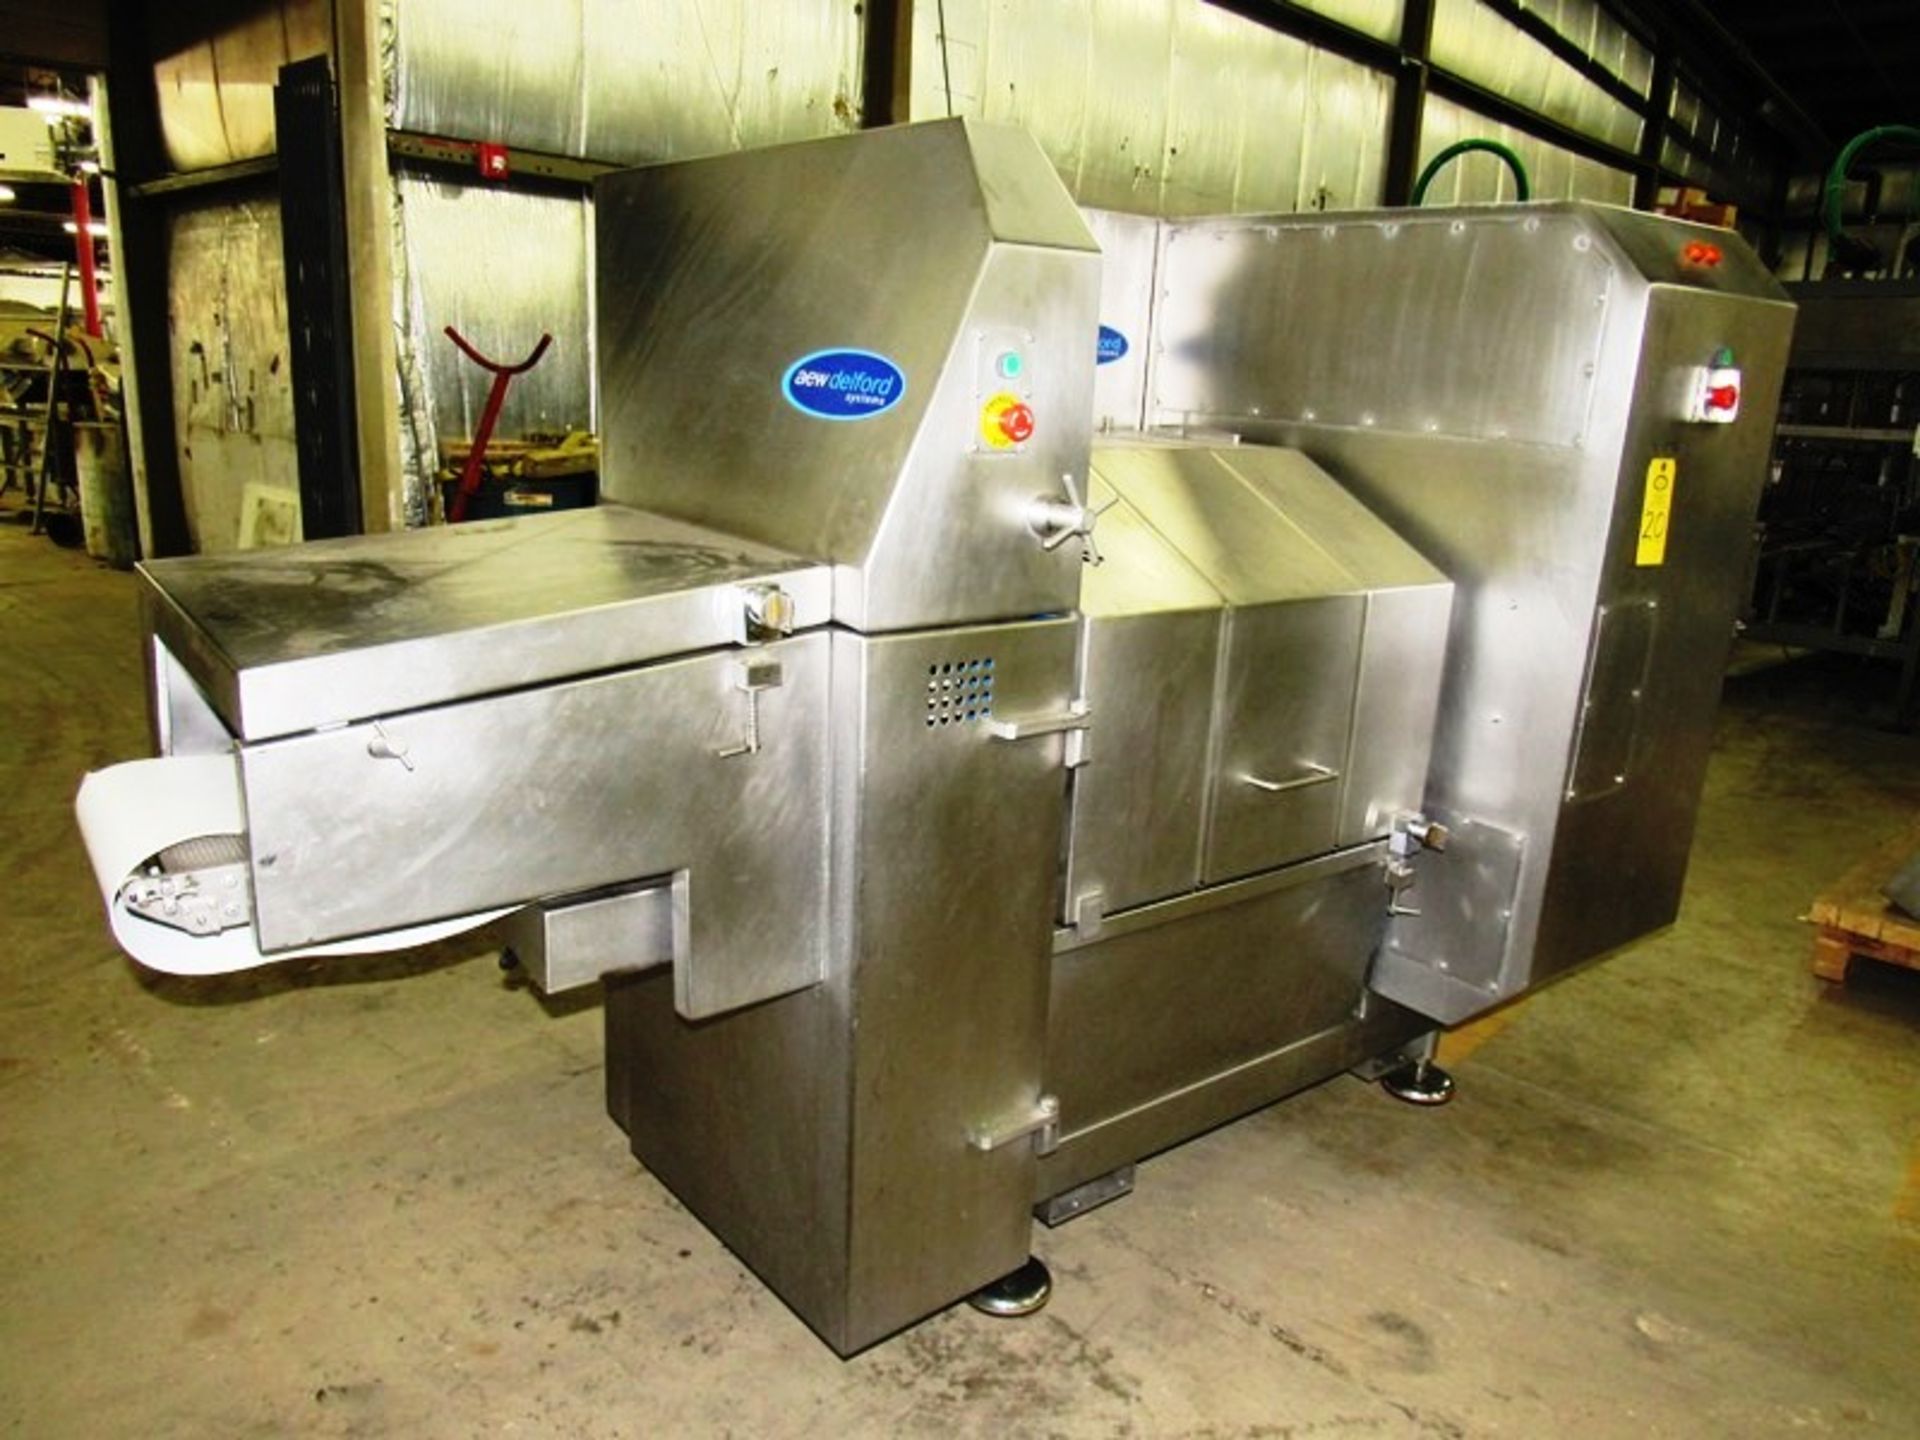 AEW Delford Mdl. SSV Vision Slicer for fresh, non frozen meats, equipped with (3) digital - Bild 9 aus 17